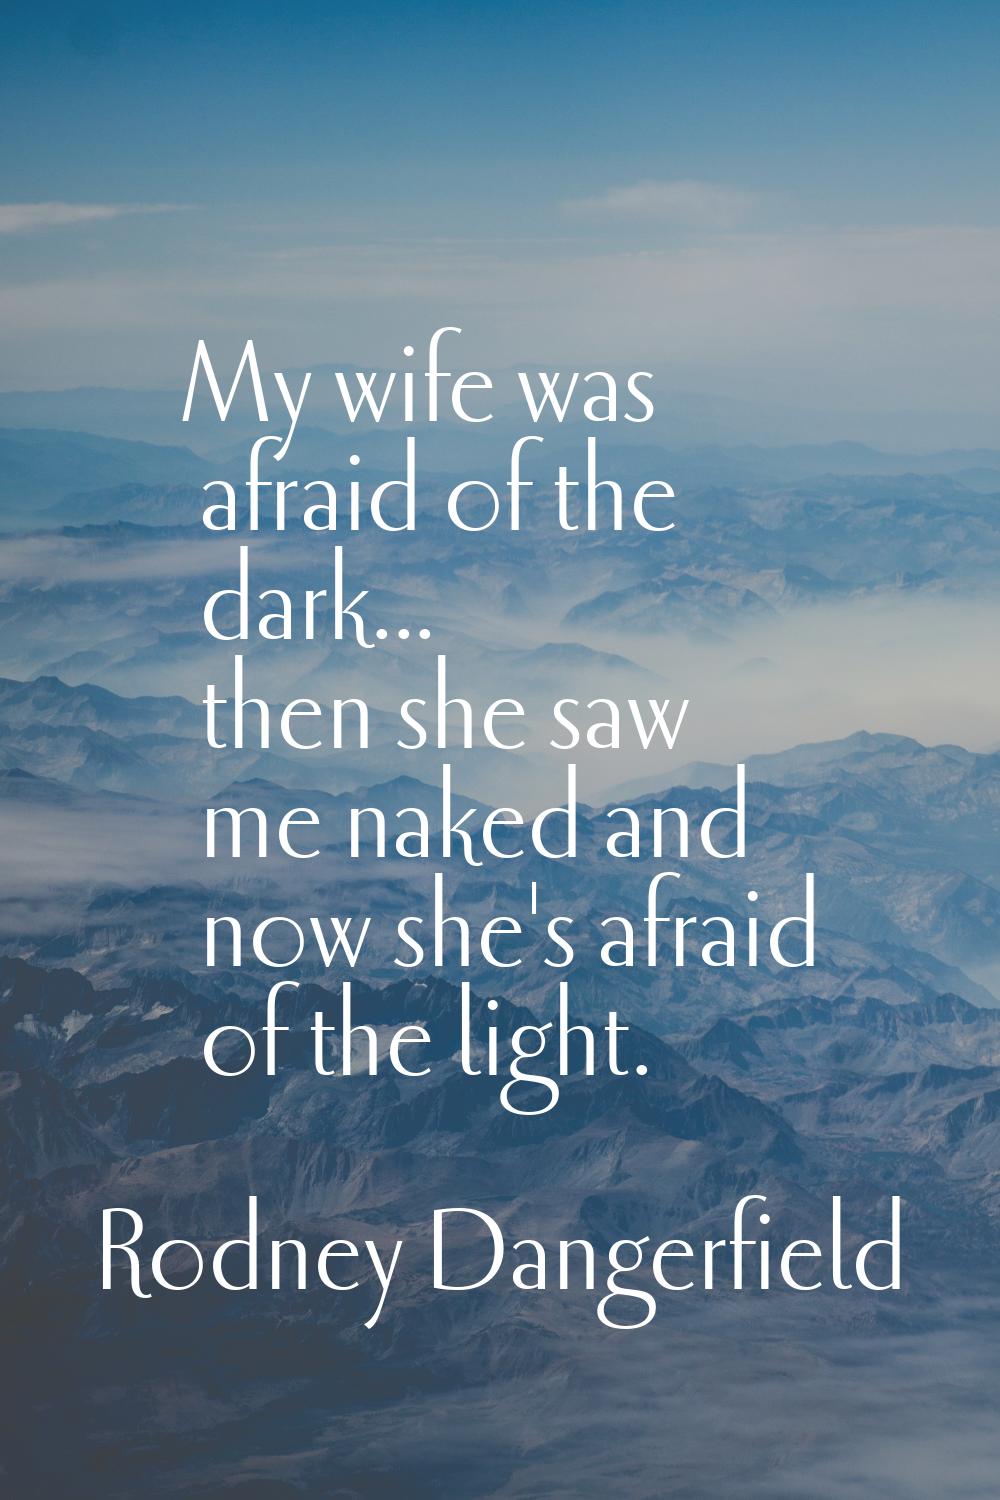 My wife was afraid of the dark... then she saw me naked and now she's afraid of the light.